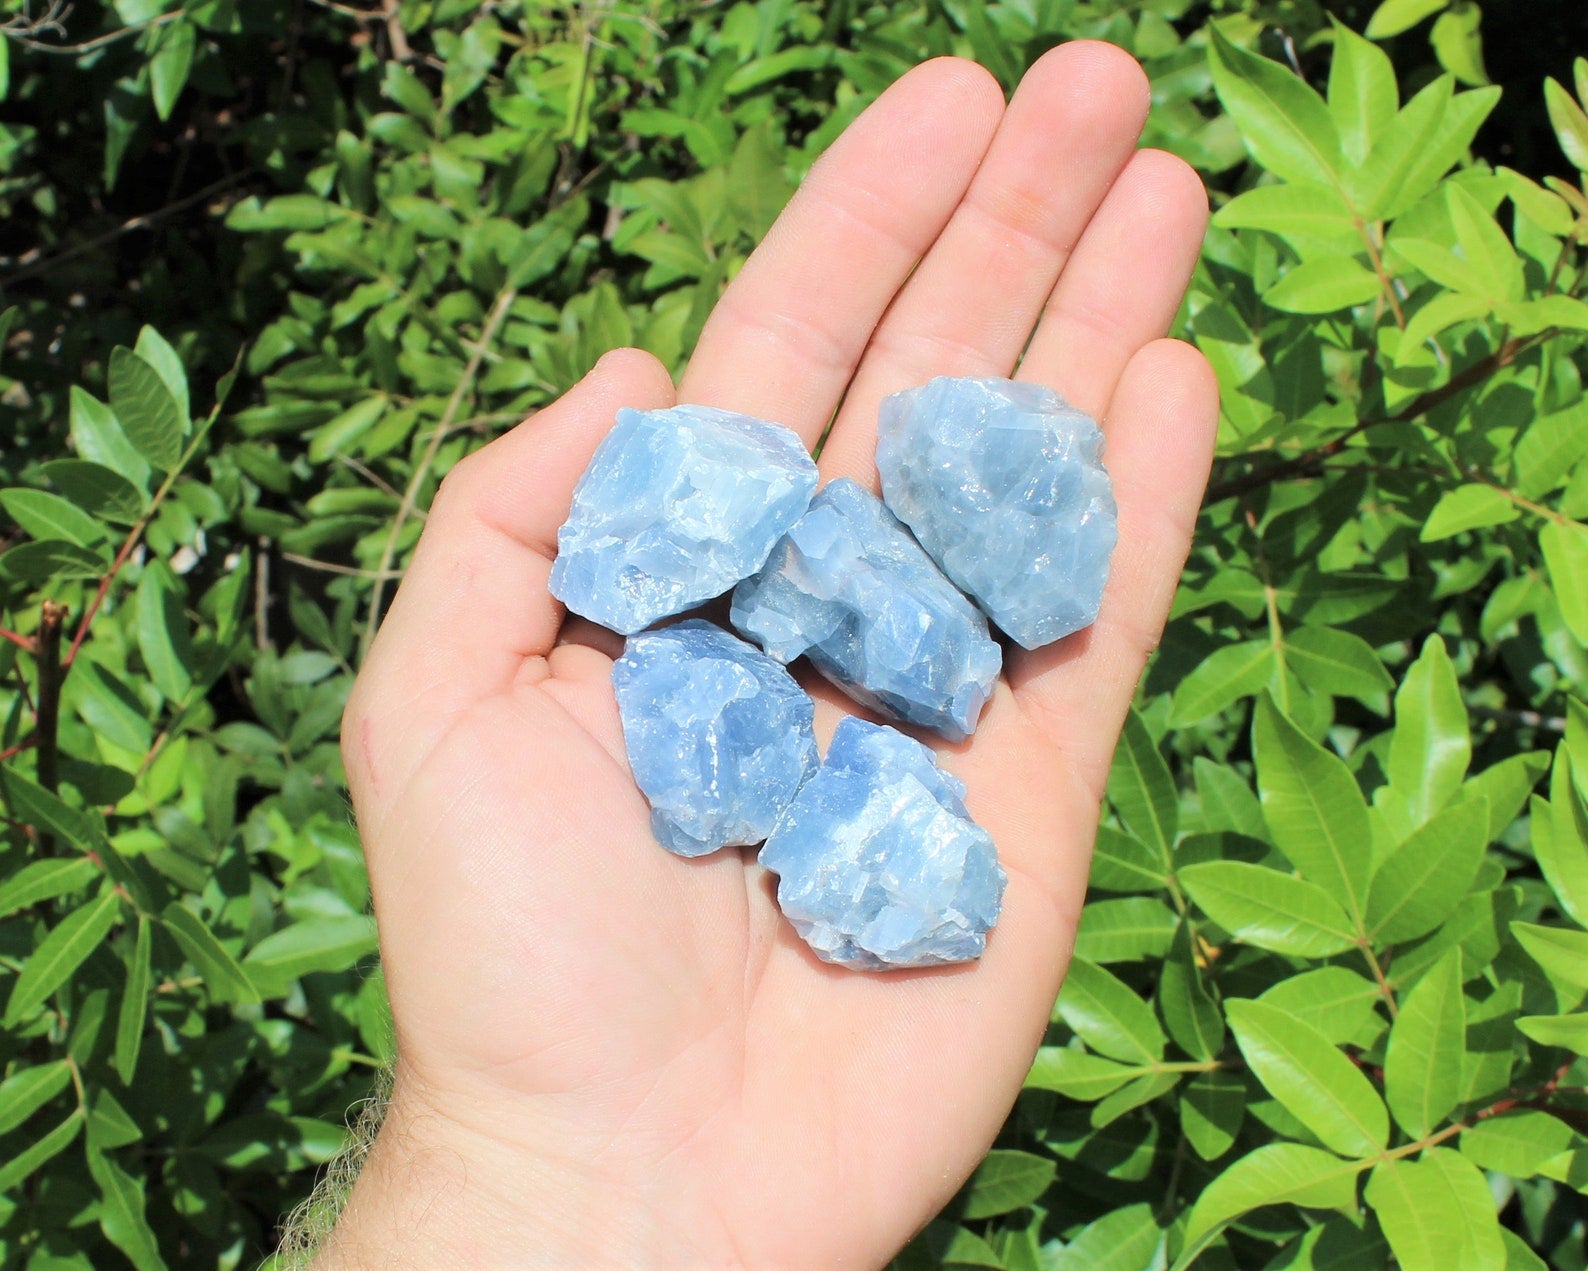 Blue Calcite Crystal Chunk - Time's Reel